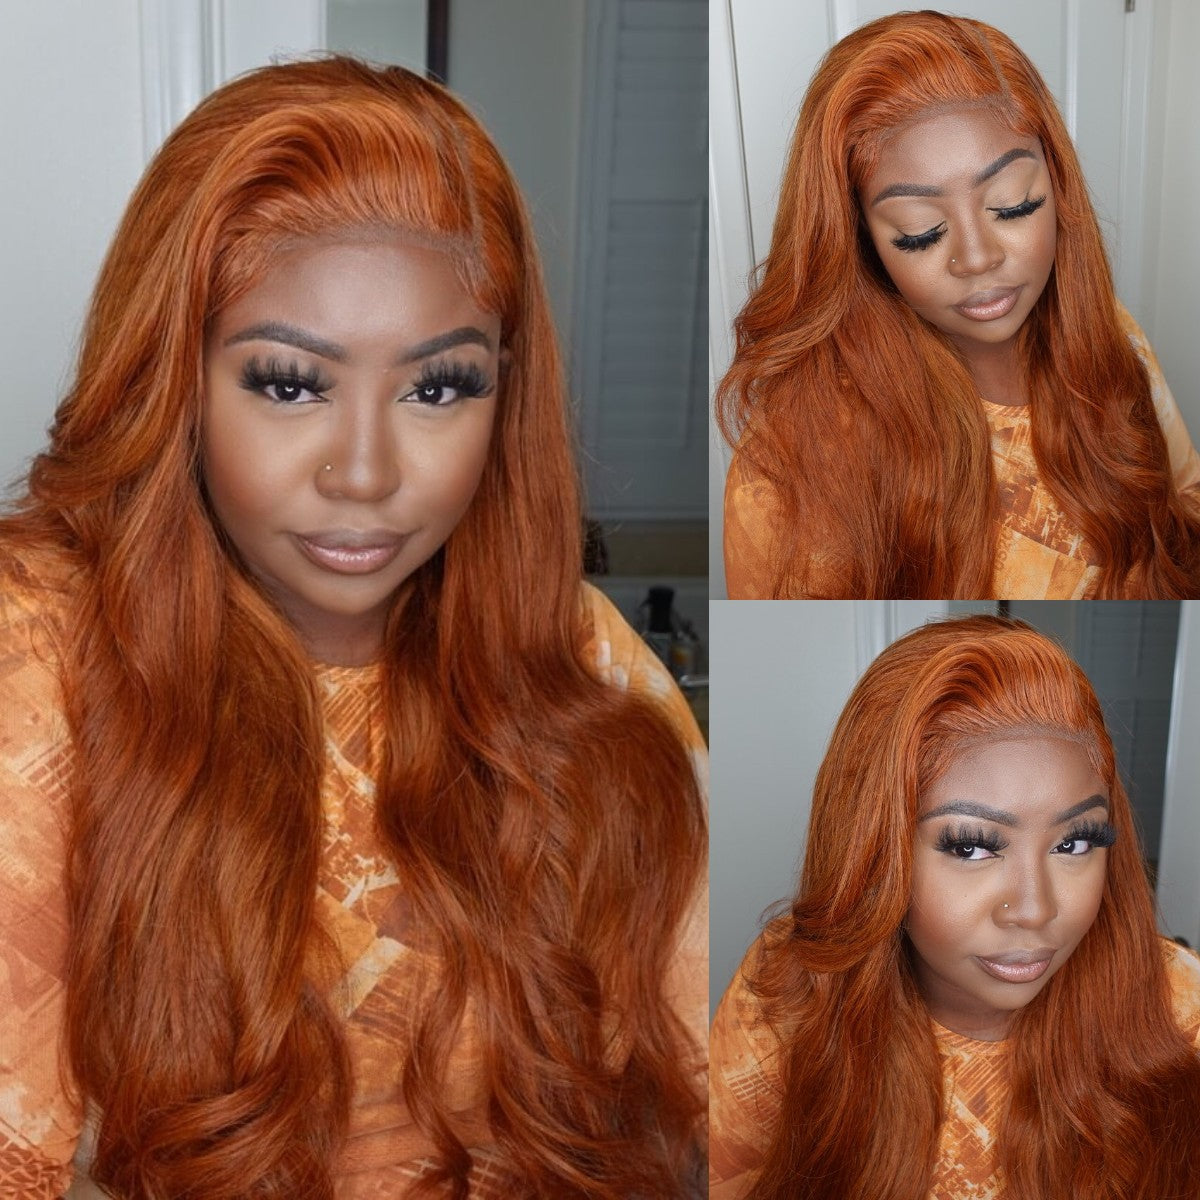 Tuneful Ginger Orange Color 13x6 13x4 5x5 Lace Front Closure Human Hair Wigs Body Wave Wigs 180% Density  Ashley Bedeck Recommend